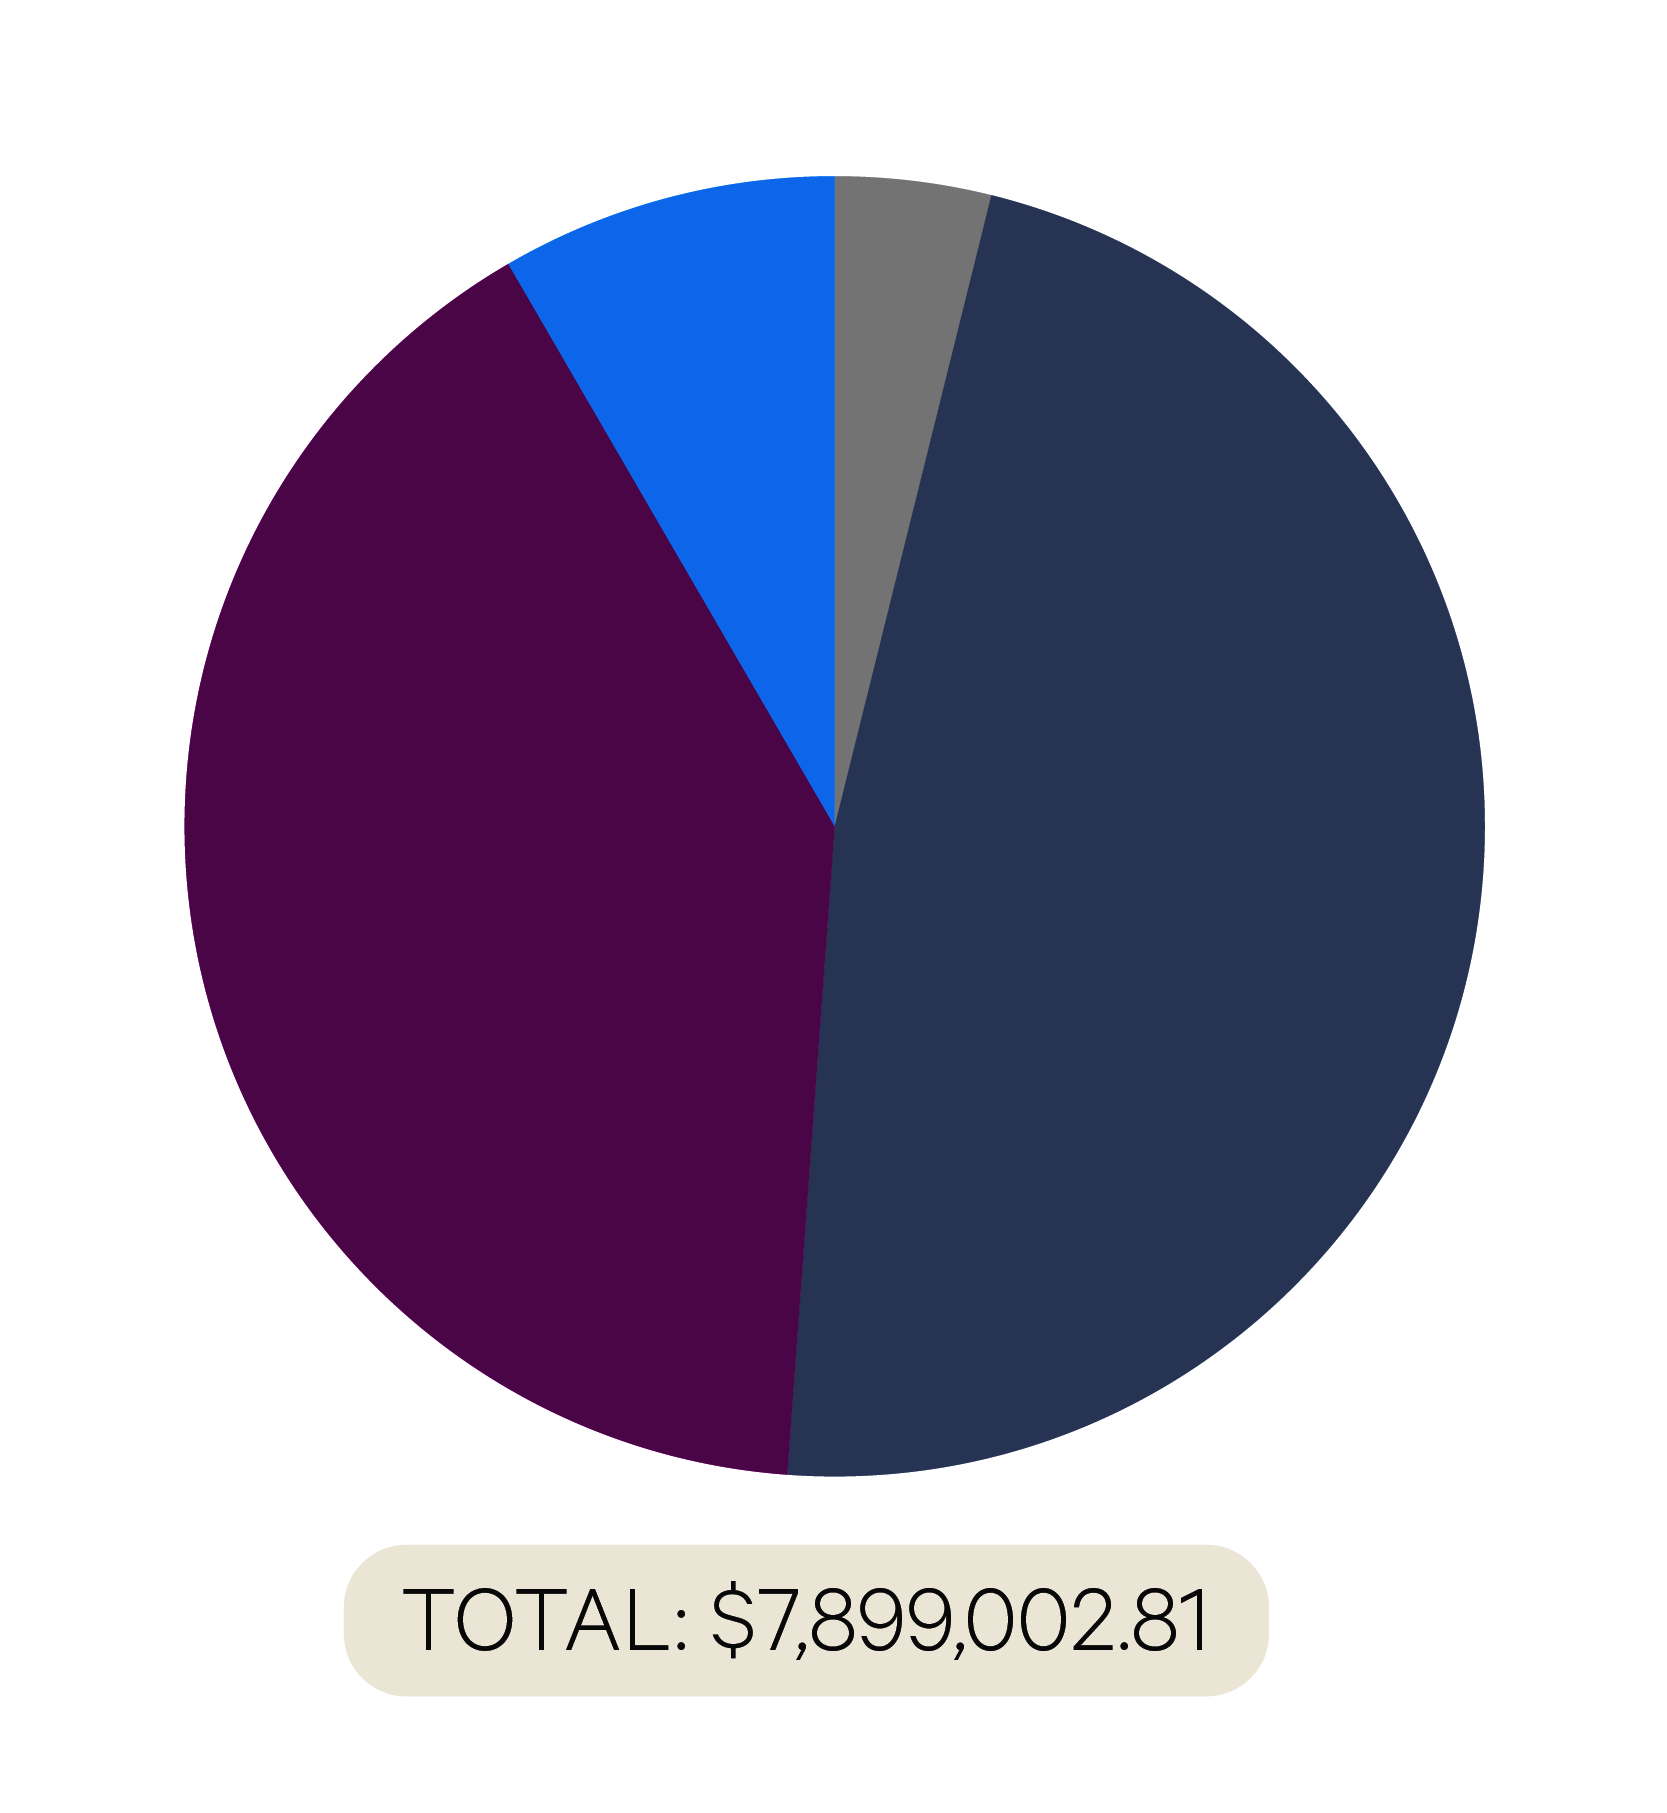 Pie chart with large sections of gray and purple, and smaller sections of blue and light-gray. Below the chart reads “TOTAL: $7,899,002.81”. 